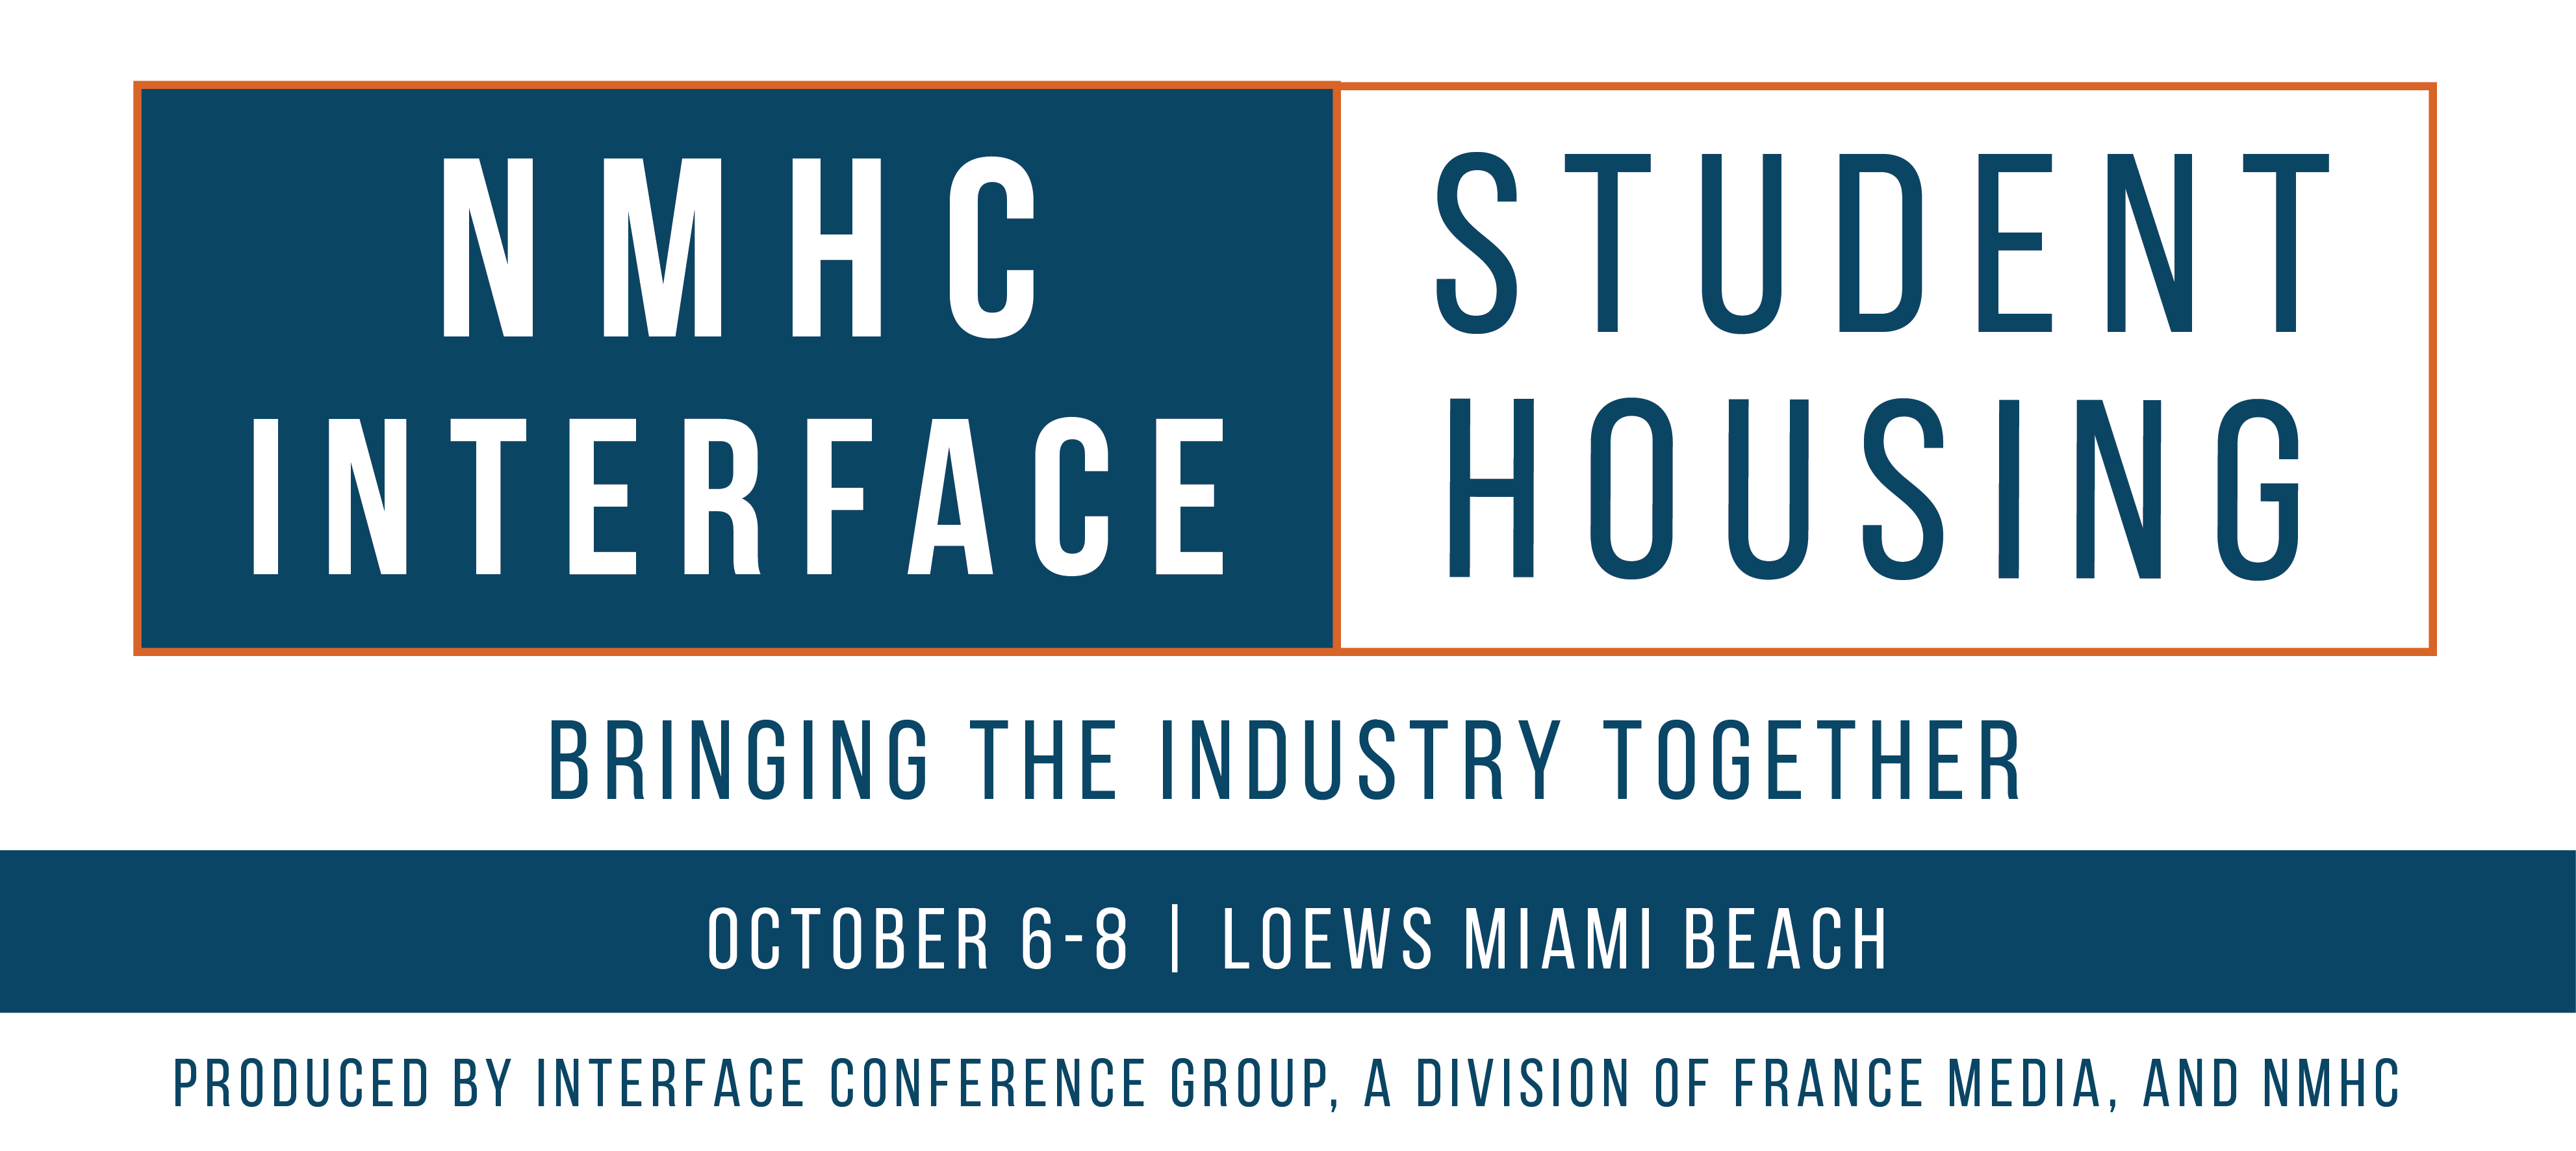 NMHC National Multifamily Housing Council and InterFace to CoHost